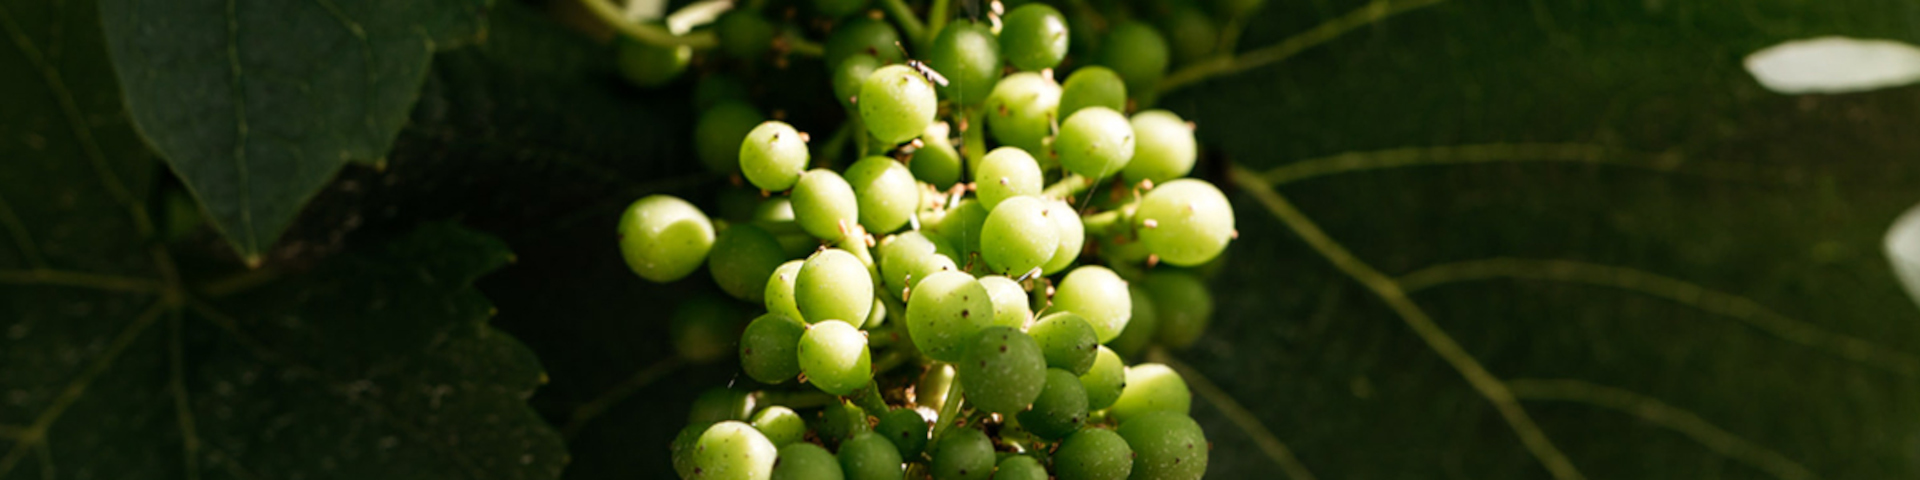 Bunch of white wine grapes on a vine outdoors